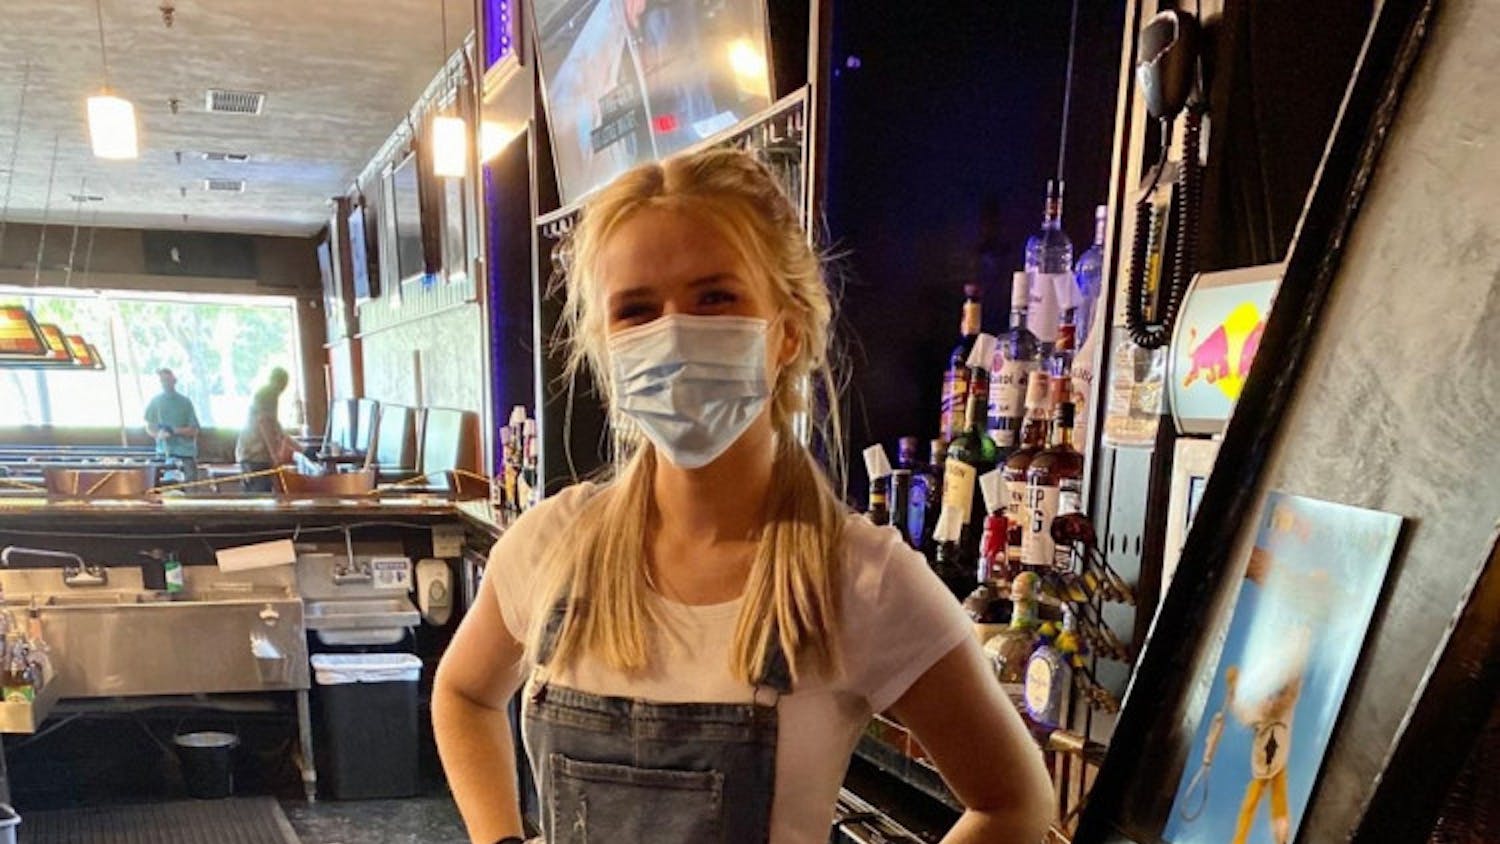 A Silver Q employee wears masks and practices proper hygiene while behind the bar.